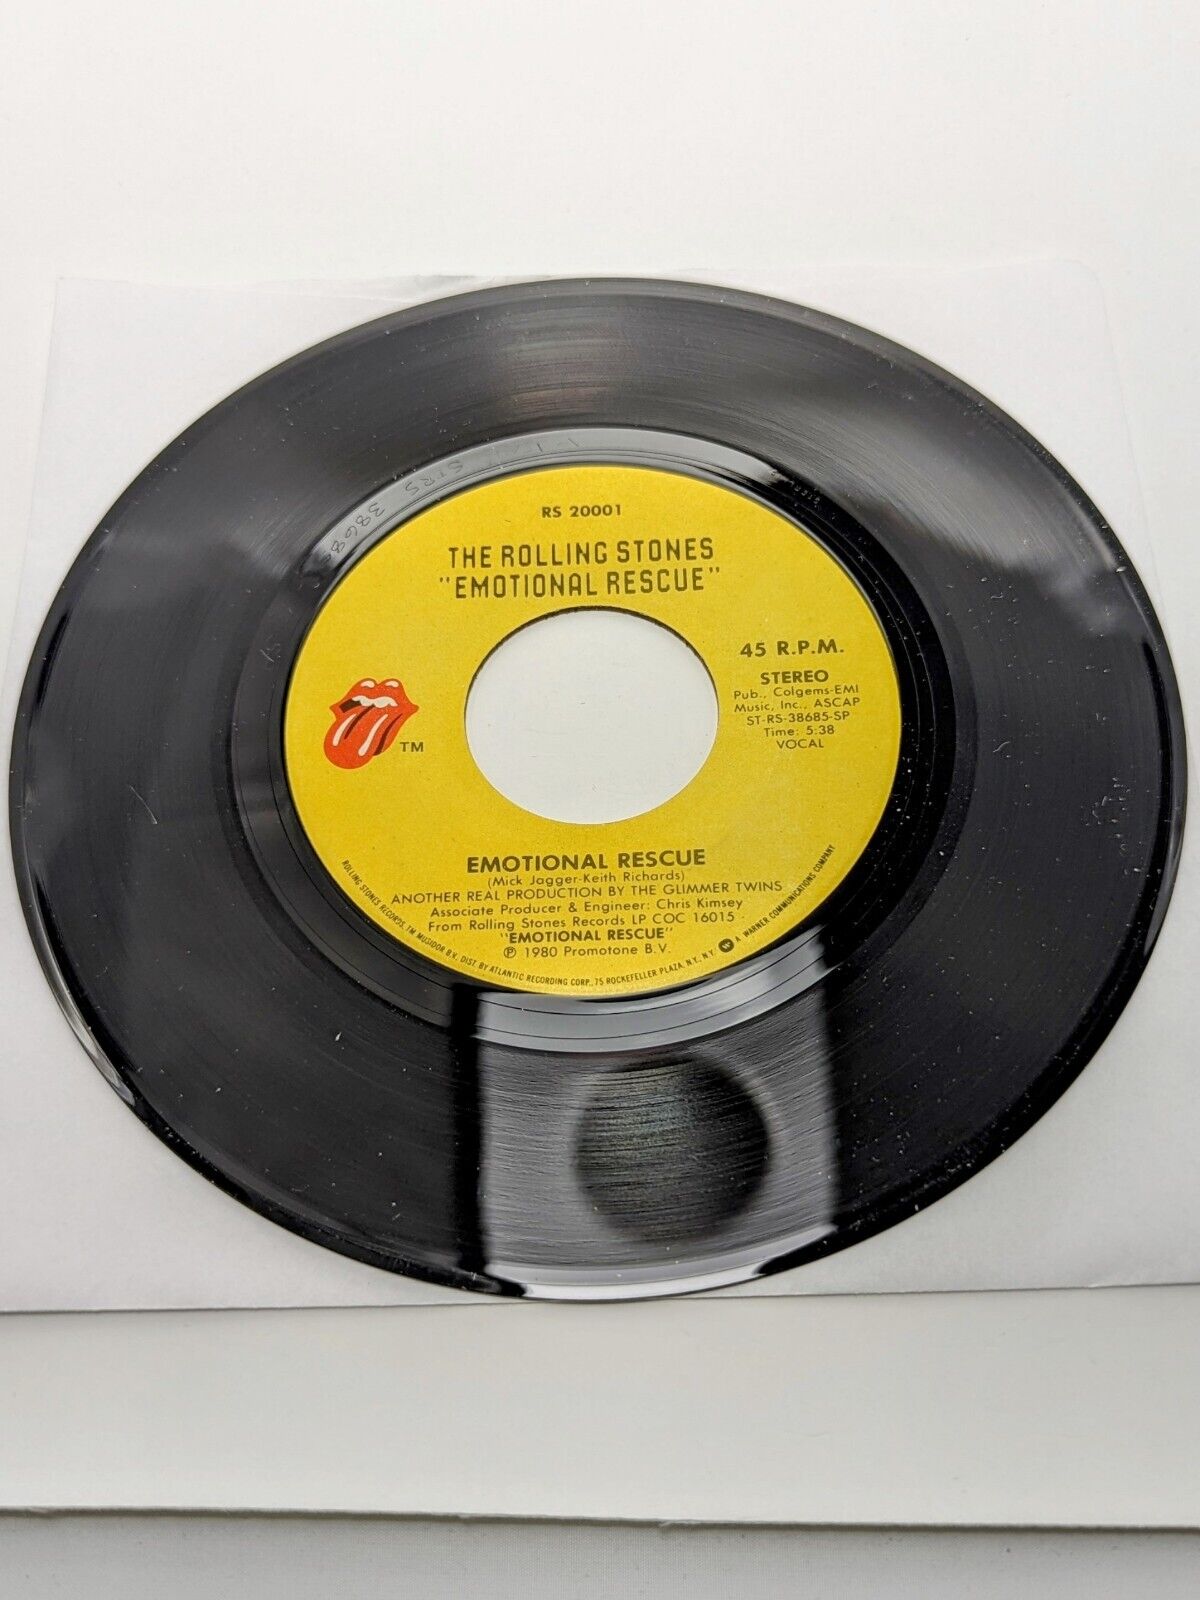 The Rolling Stones "Emotional Rescue" 1980 Rolling Stones Records RS 20001 7" 45